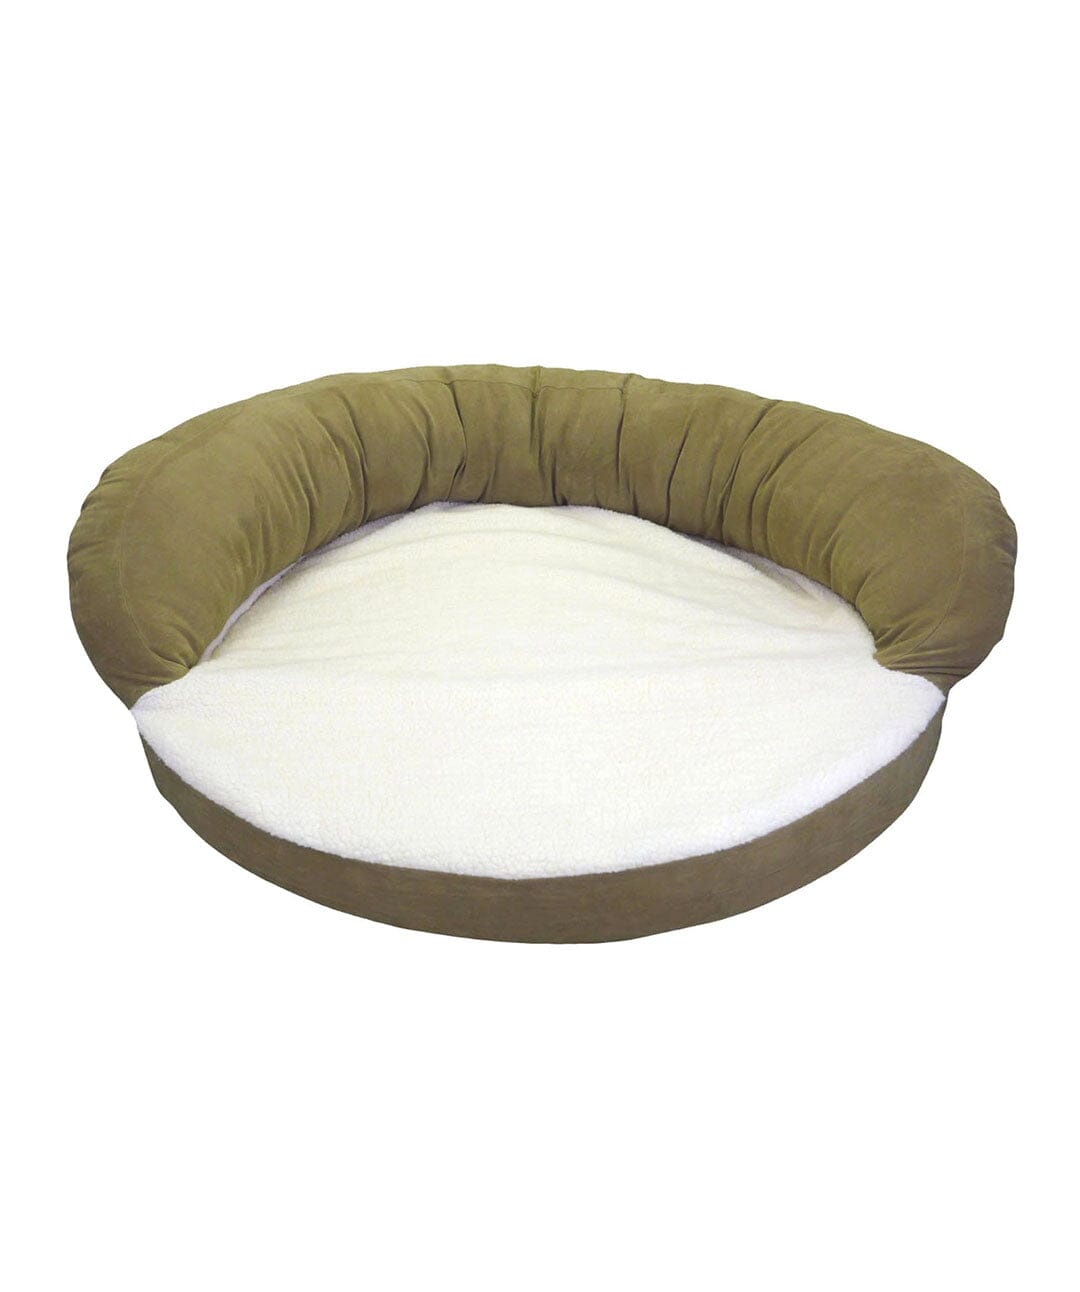 sage green orthopedic dog bed with bolster